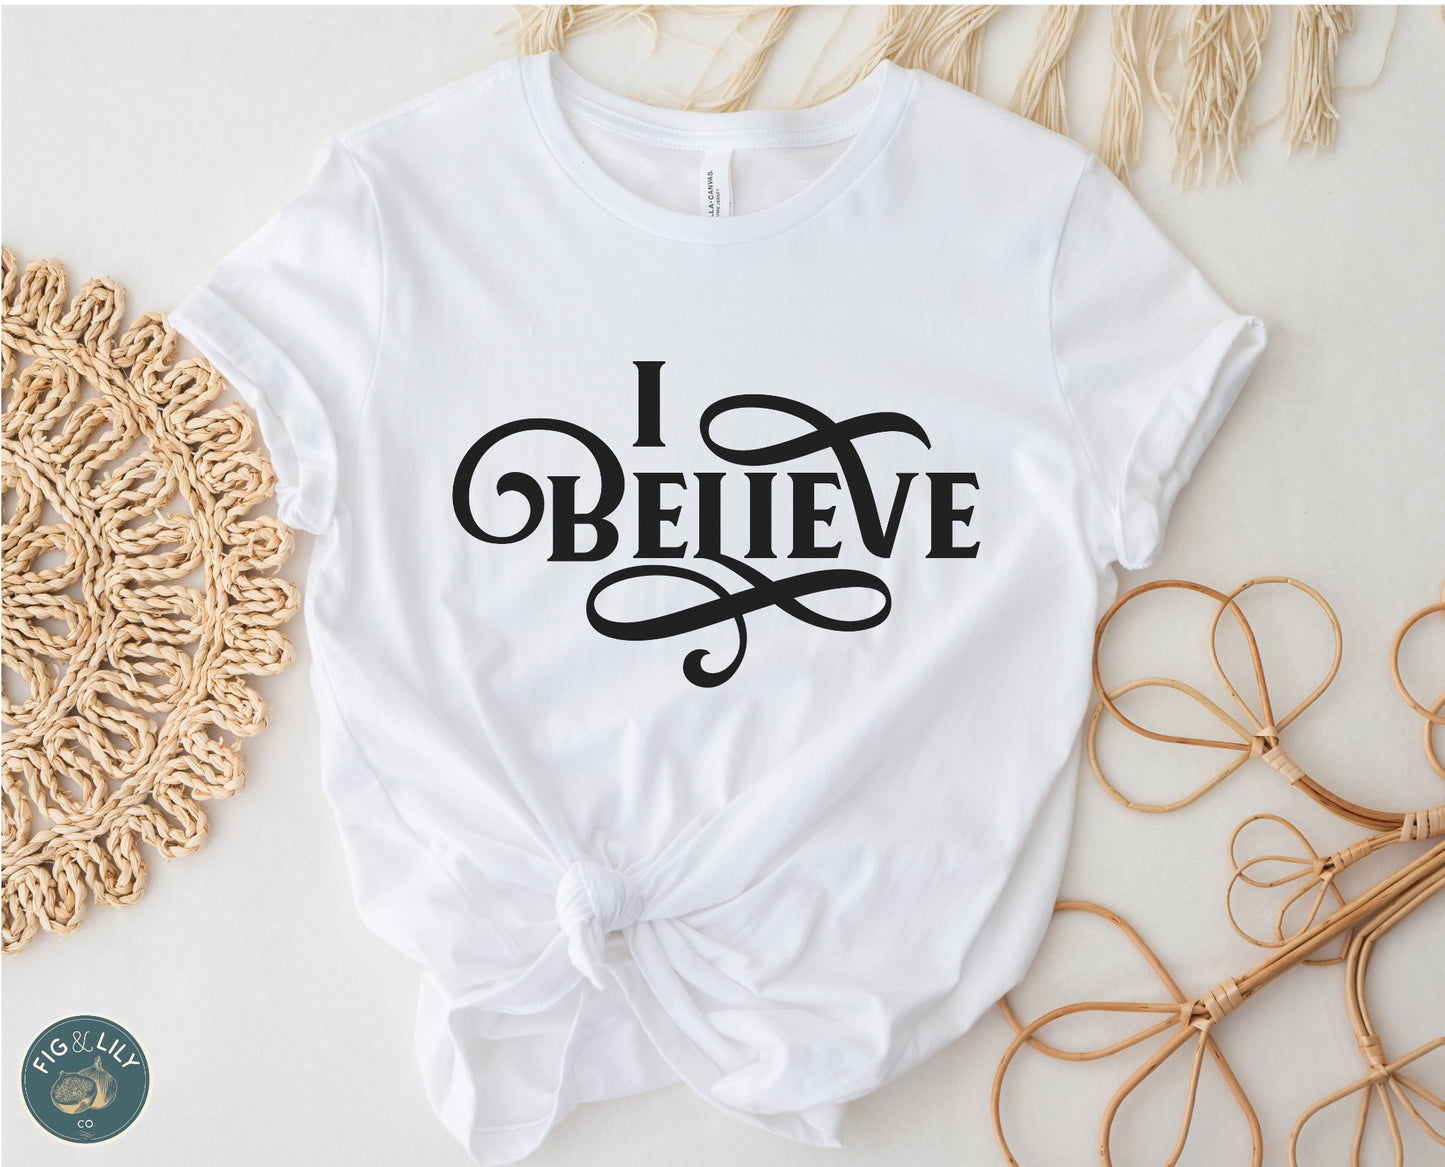 I Believe Swirl Christian aesthetic Jesus believer t-shirt design printed in black on soft white tee for women, great gift for her